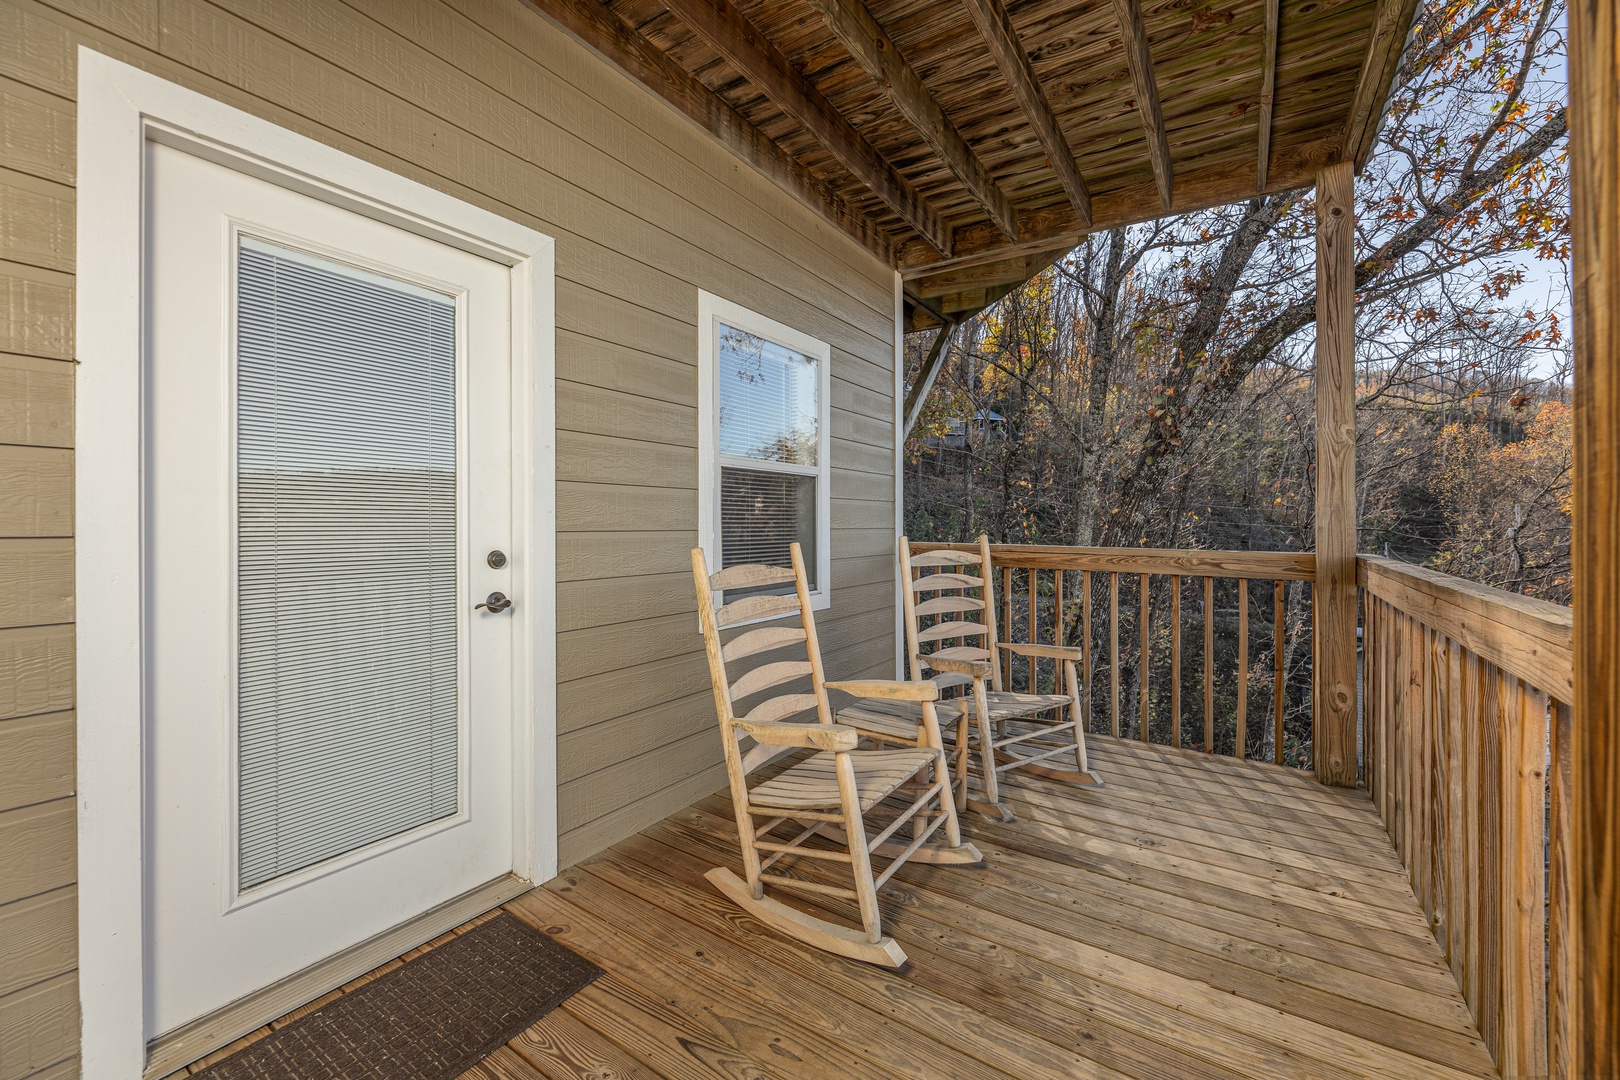 Rocking chairs on the deck at Le Bear Chalet, a 7 bedroom cabin rental located in Gatlinburg